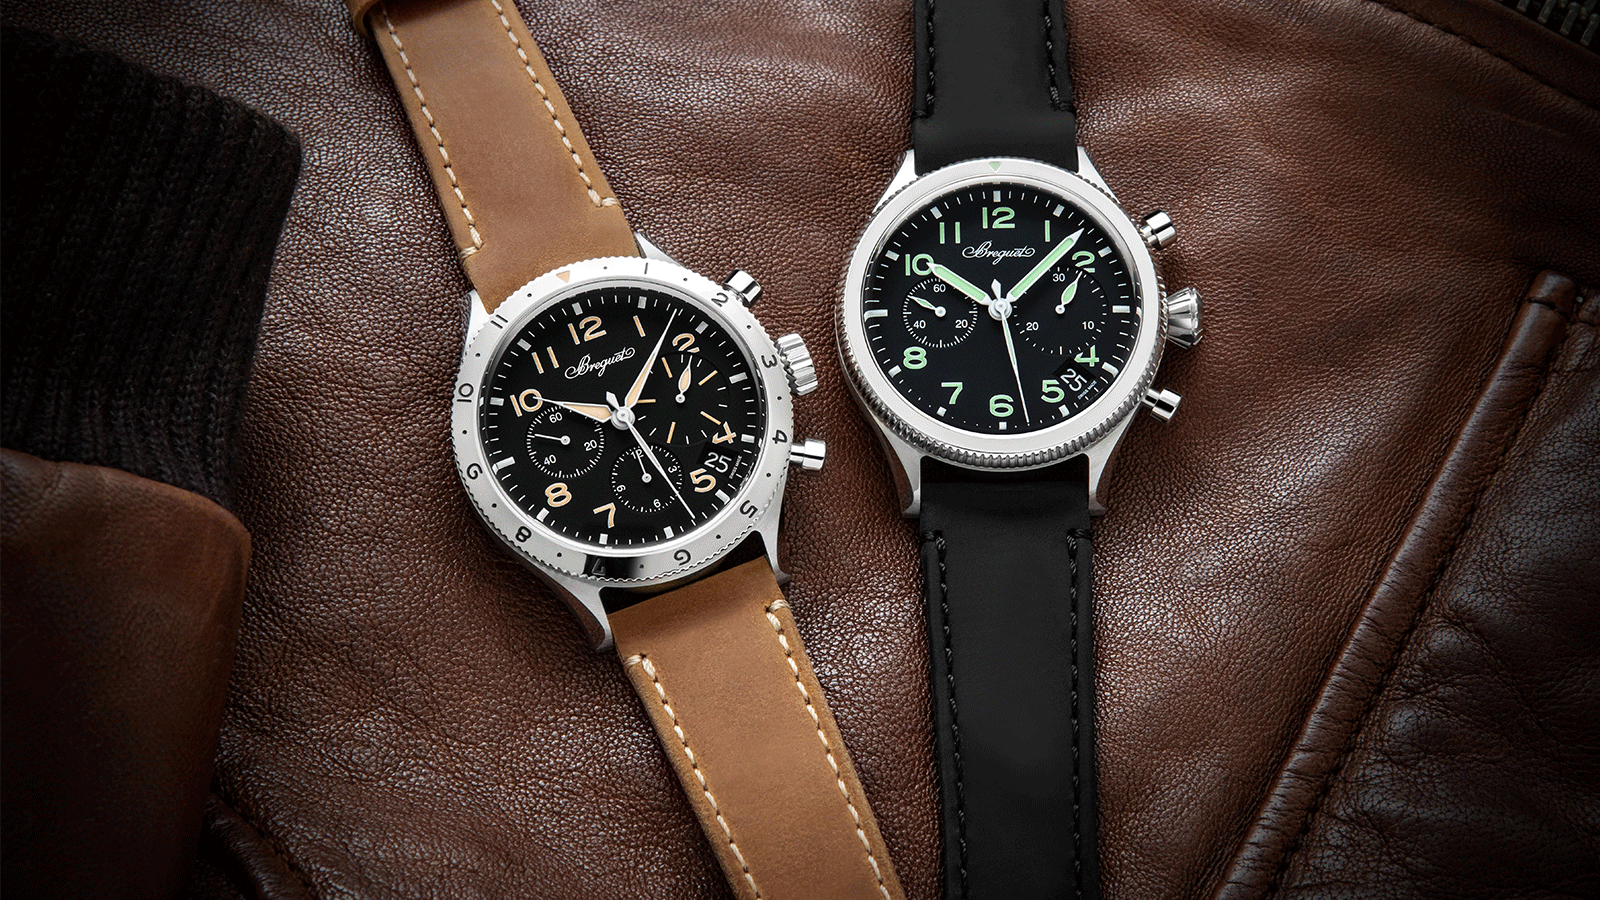 TYPE XX & TYPE 20 - This collection enjoying iconic status for nearly 70 years has accompanied the history of aviation – whether on pilots’ wrists as a precision instrument or on those of ordinary amateur enthusiasts fascinated by its legendary qualities. The Manufacture Breguet proudly unveils a redesigned line that is innovative, highly contemporary and brimming with nods to history.